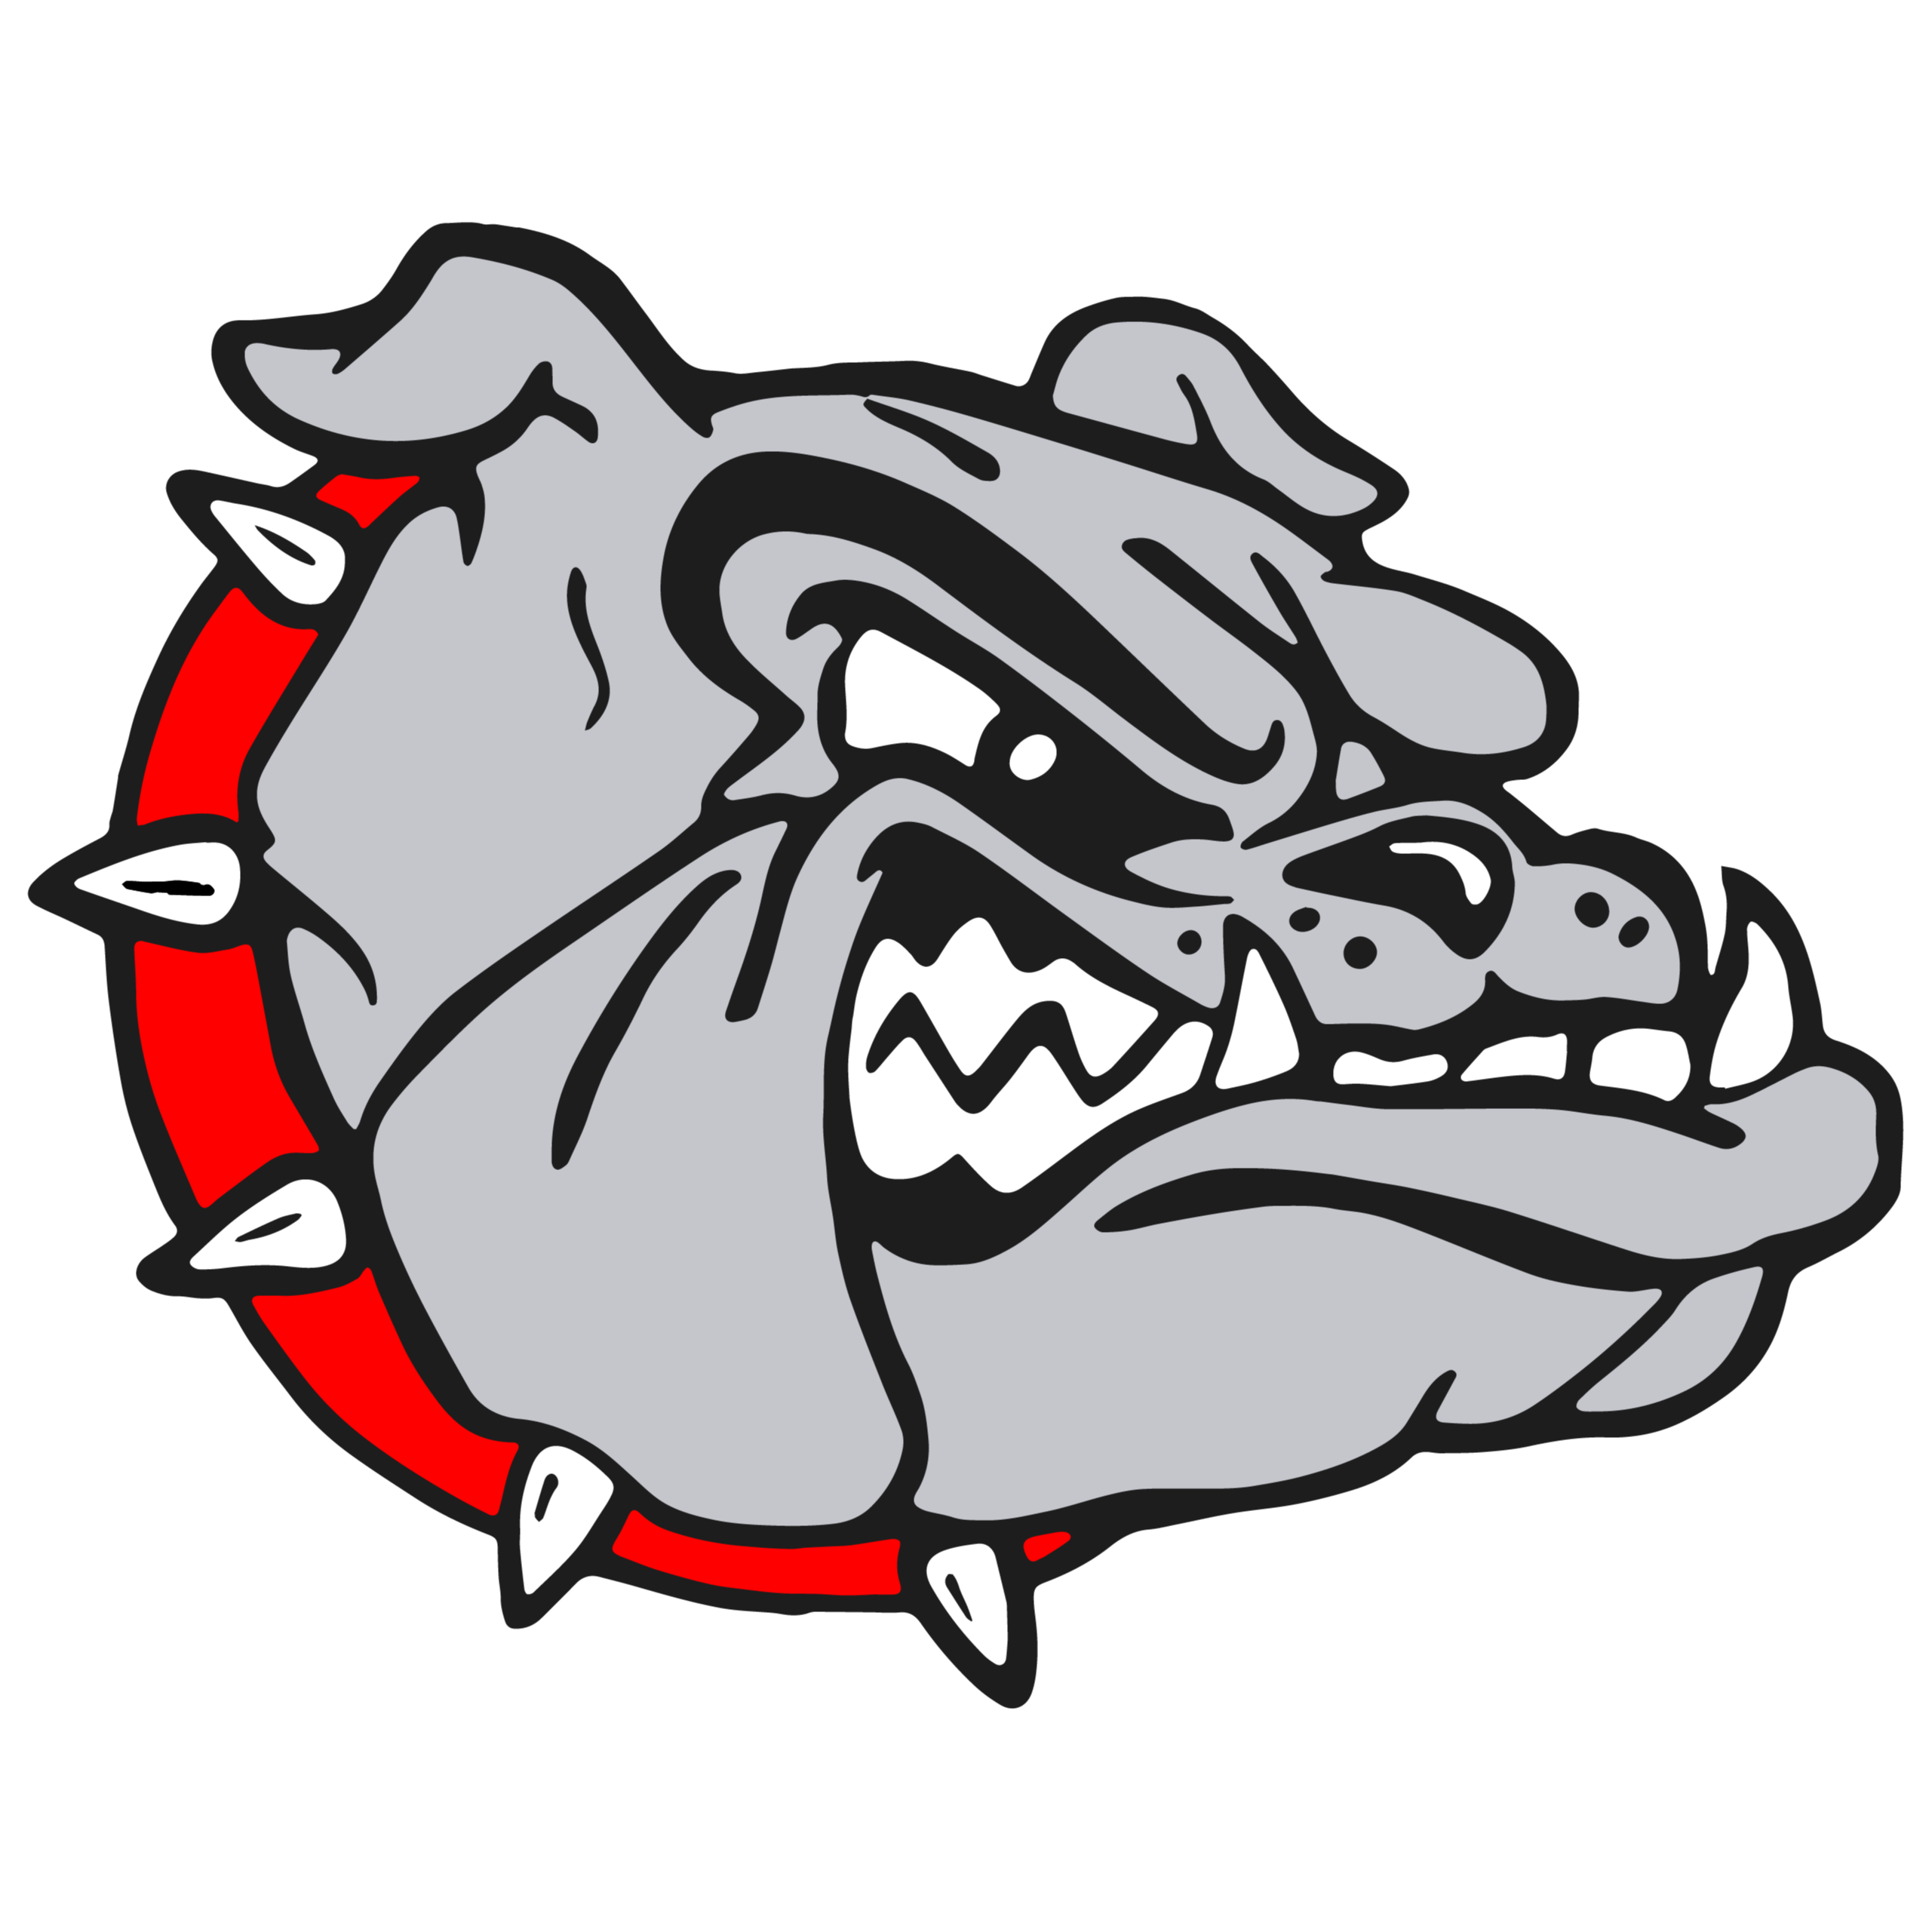 Logo of a fierce, gray bulldog head showing its teeth and wearing a red, spikey collar